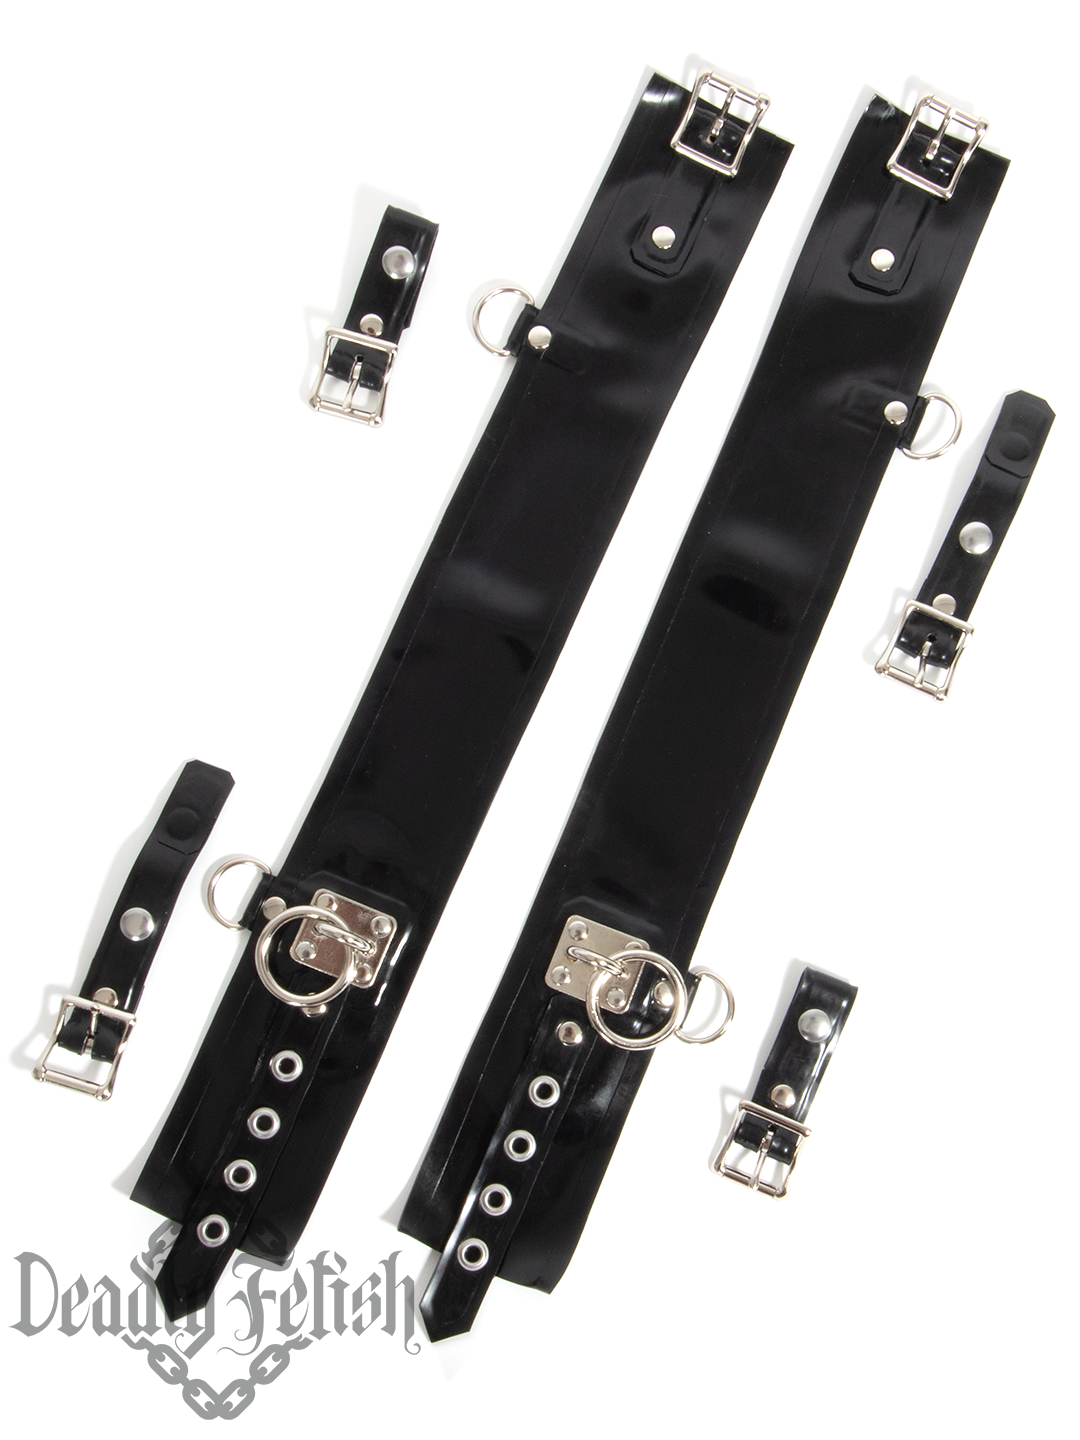 Deadly Fetish Latex: Harness Addition #22 Tie Plate Buckle Leg Braces